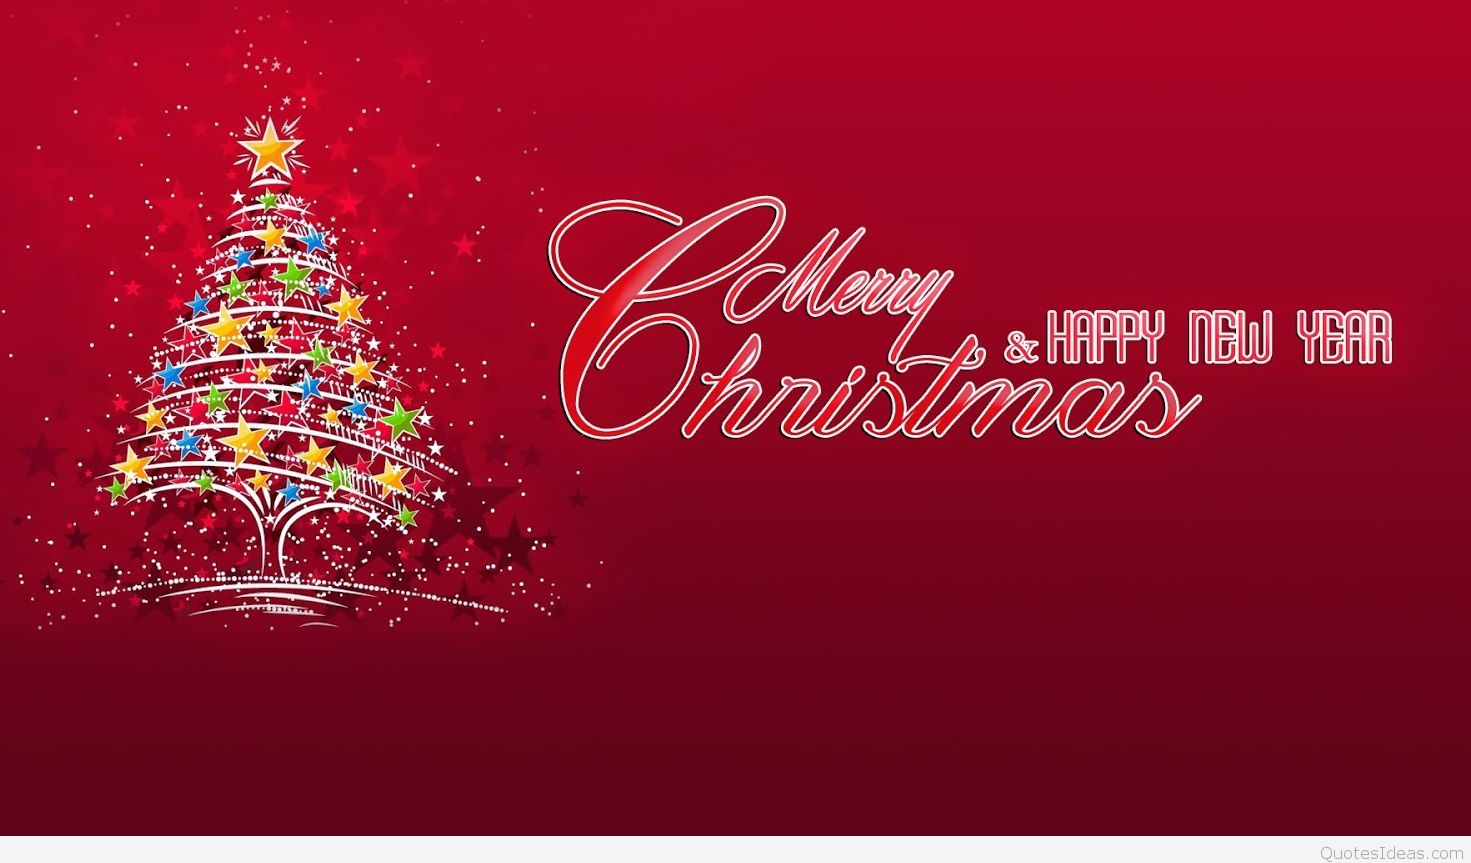 Merry christmas and happy new year wallpaper